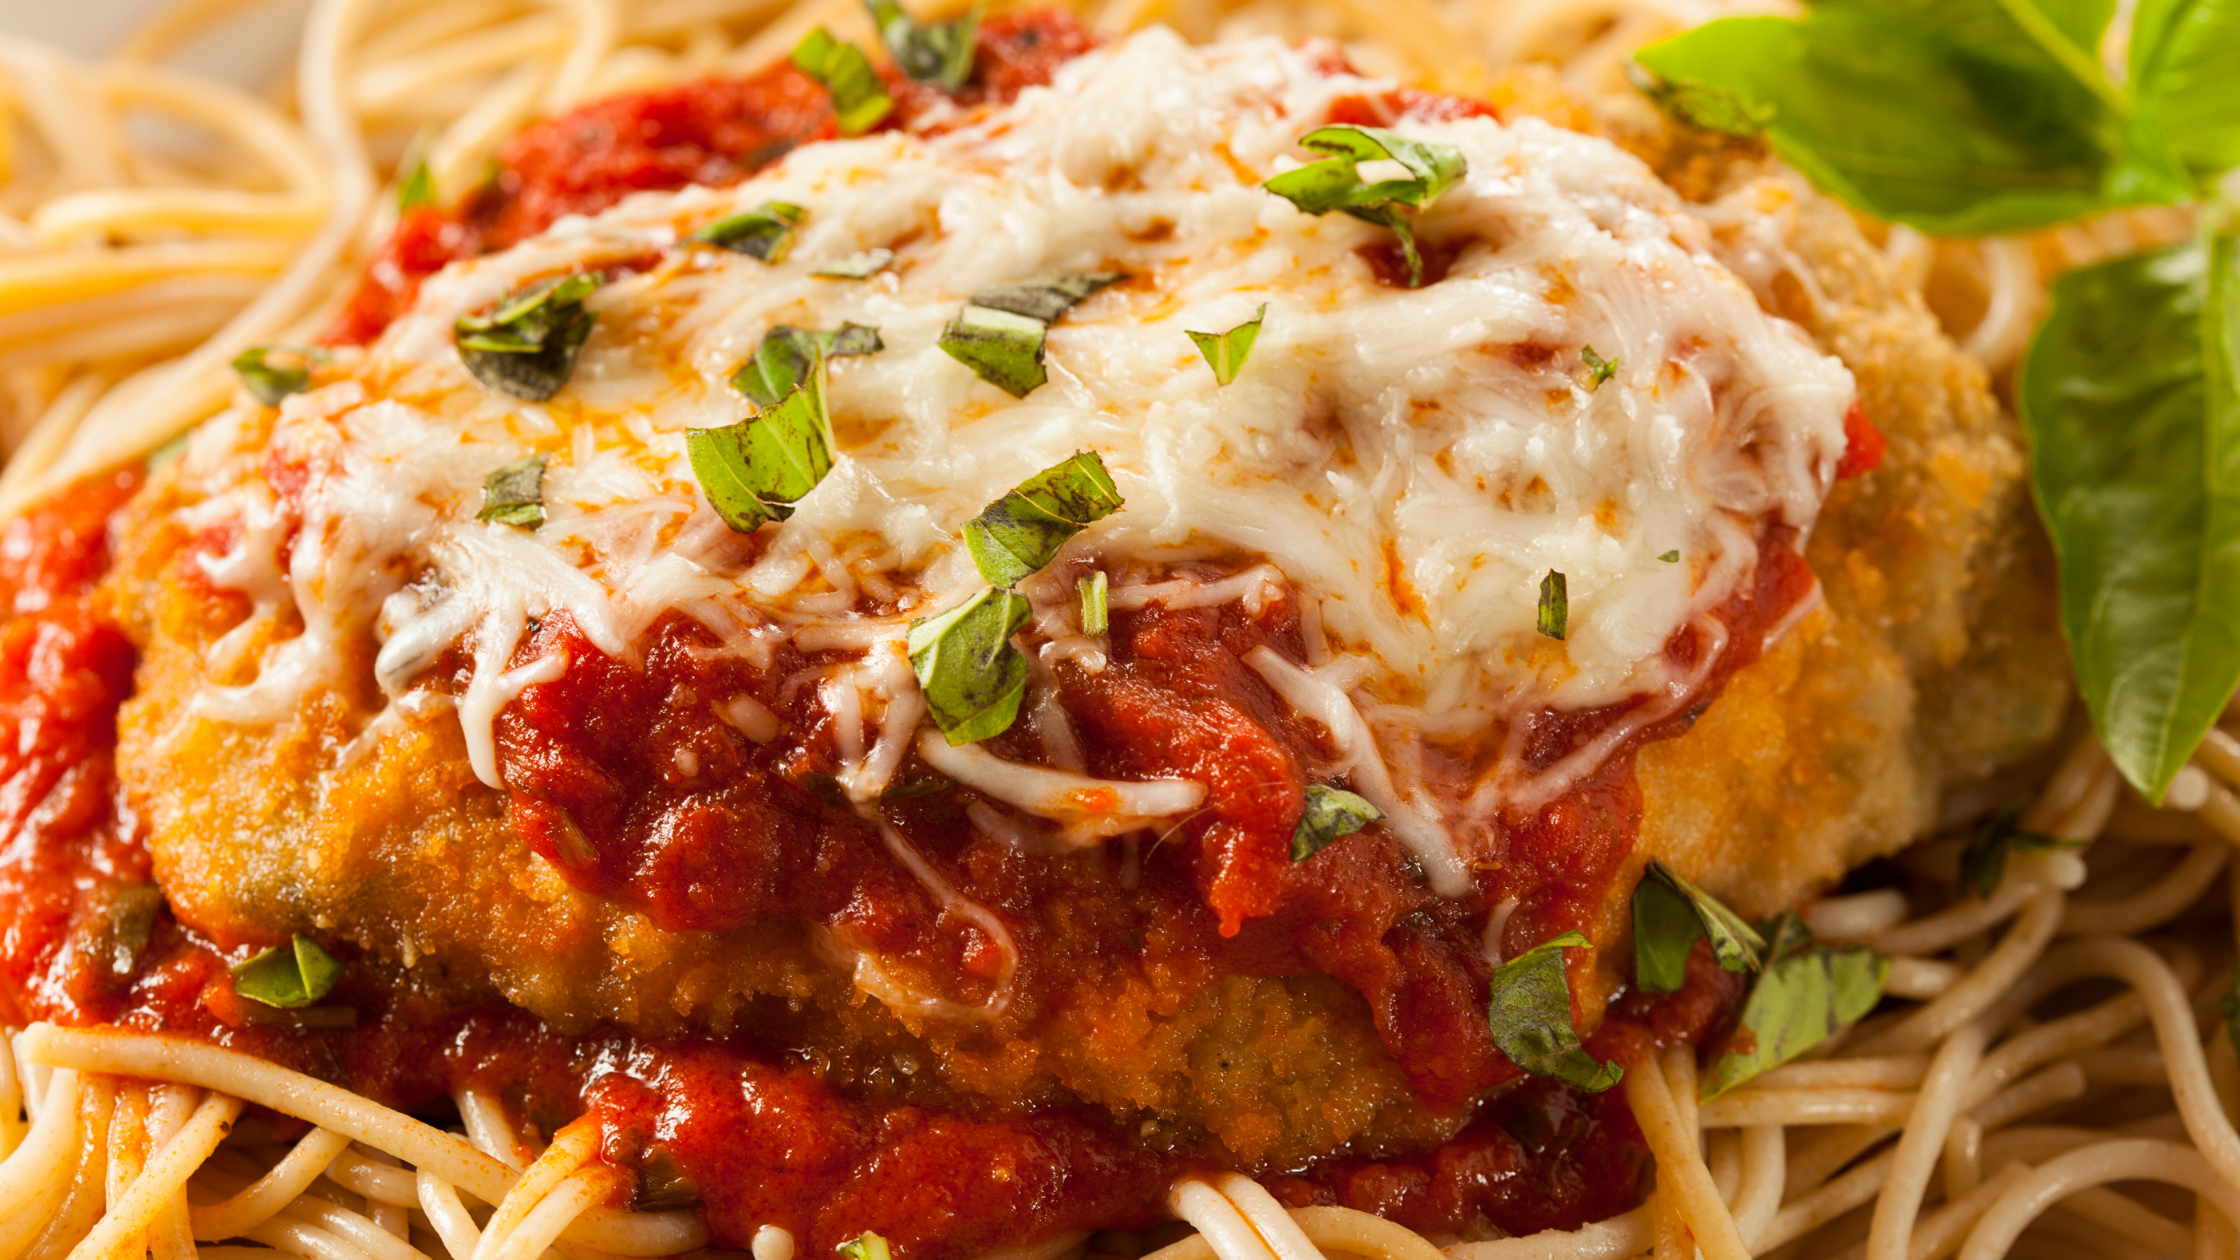 Low Calorie Chicken Parmesan with Whole Grain Spaghetti: A Healthy Recipe for Delicious Italian Food 4